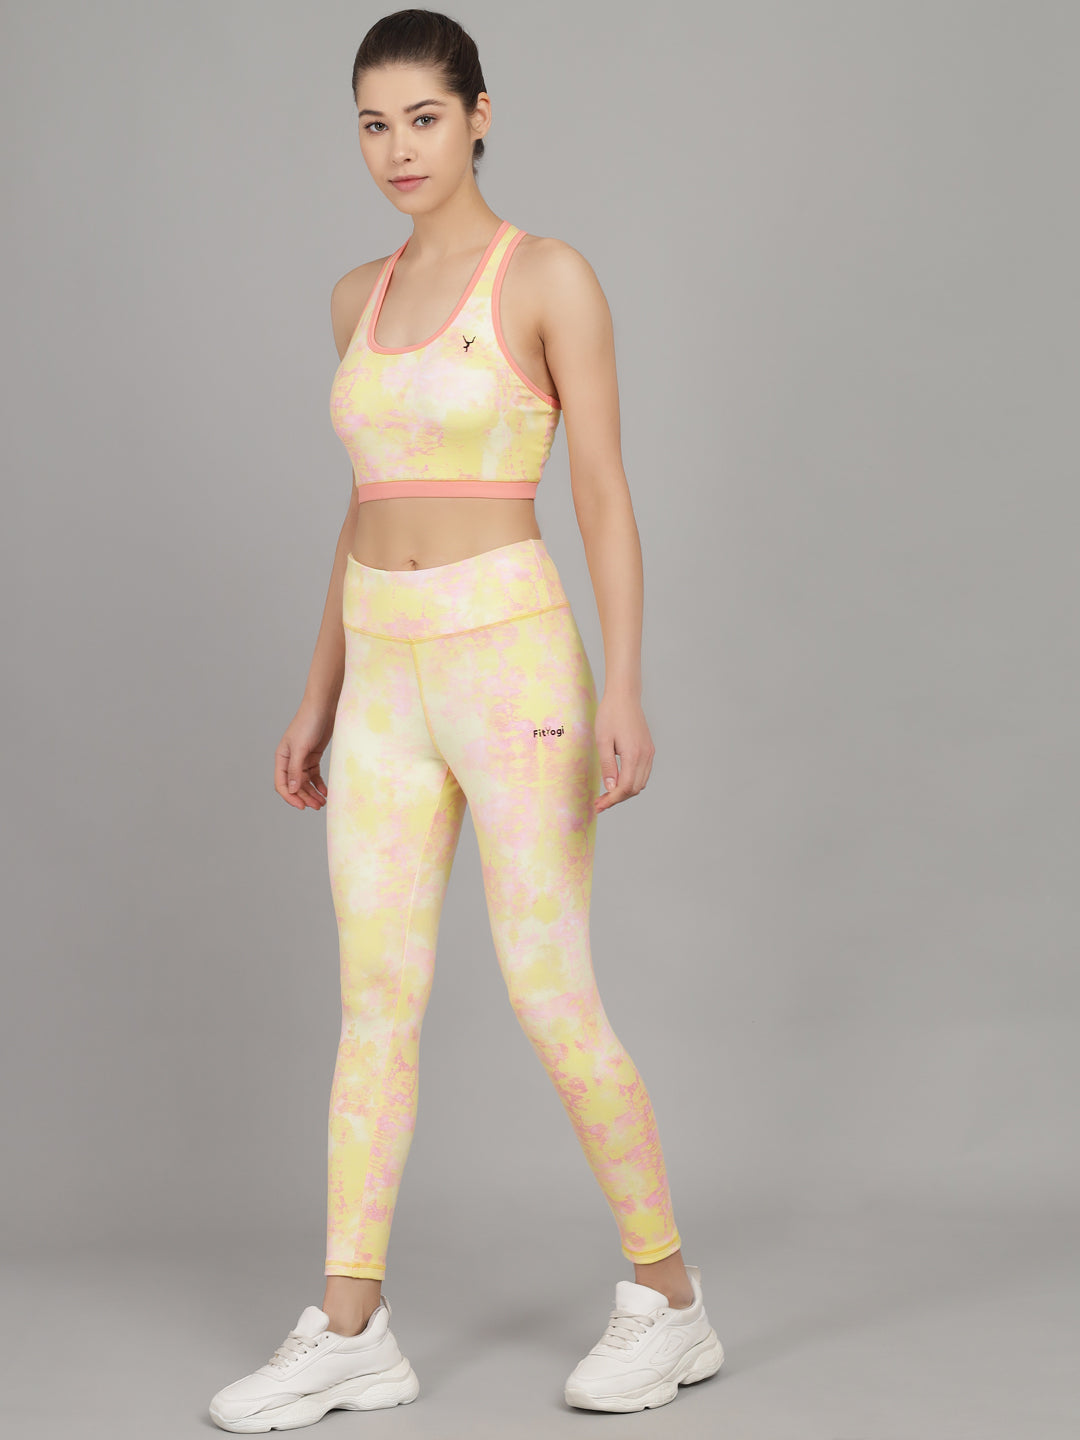 Mustard Yellow Stretchable Yoga Sets Tracksuit/gym Sports Set Of Sports Bra And Legging